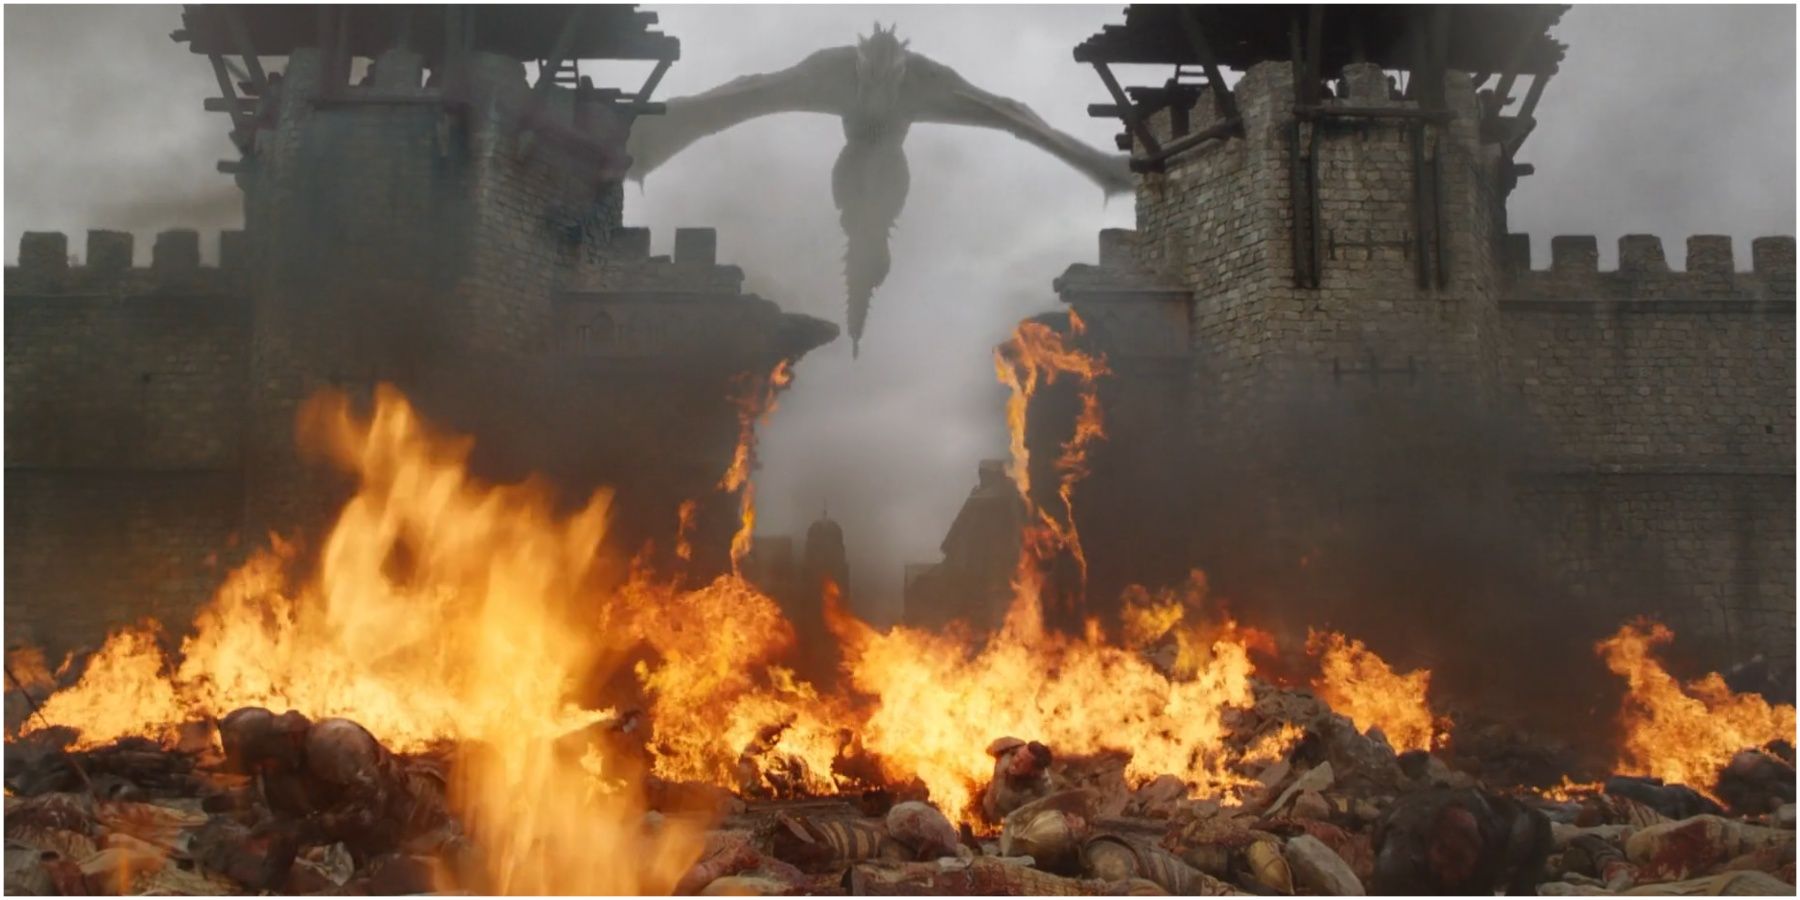 Drogon burns the city gates in Game of Thrones.